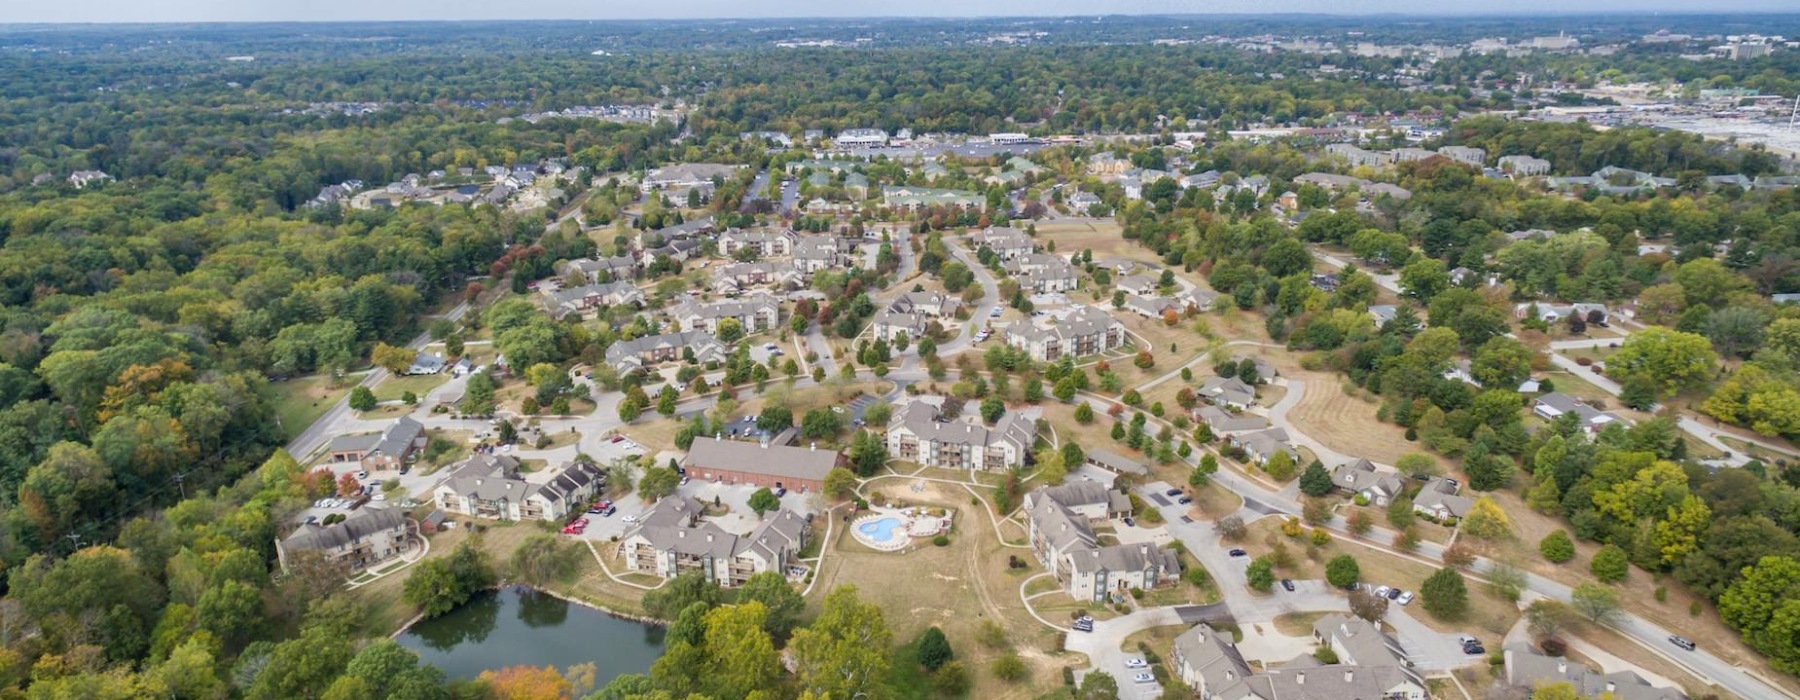 Aerial view of The Fields Apartments in Bloomington, Indiana